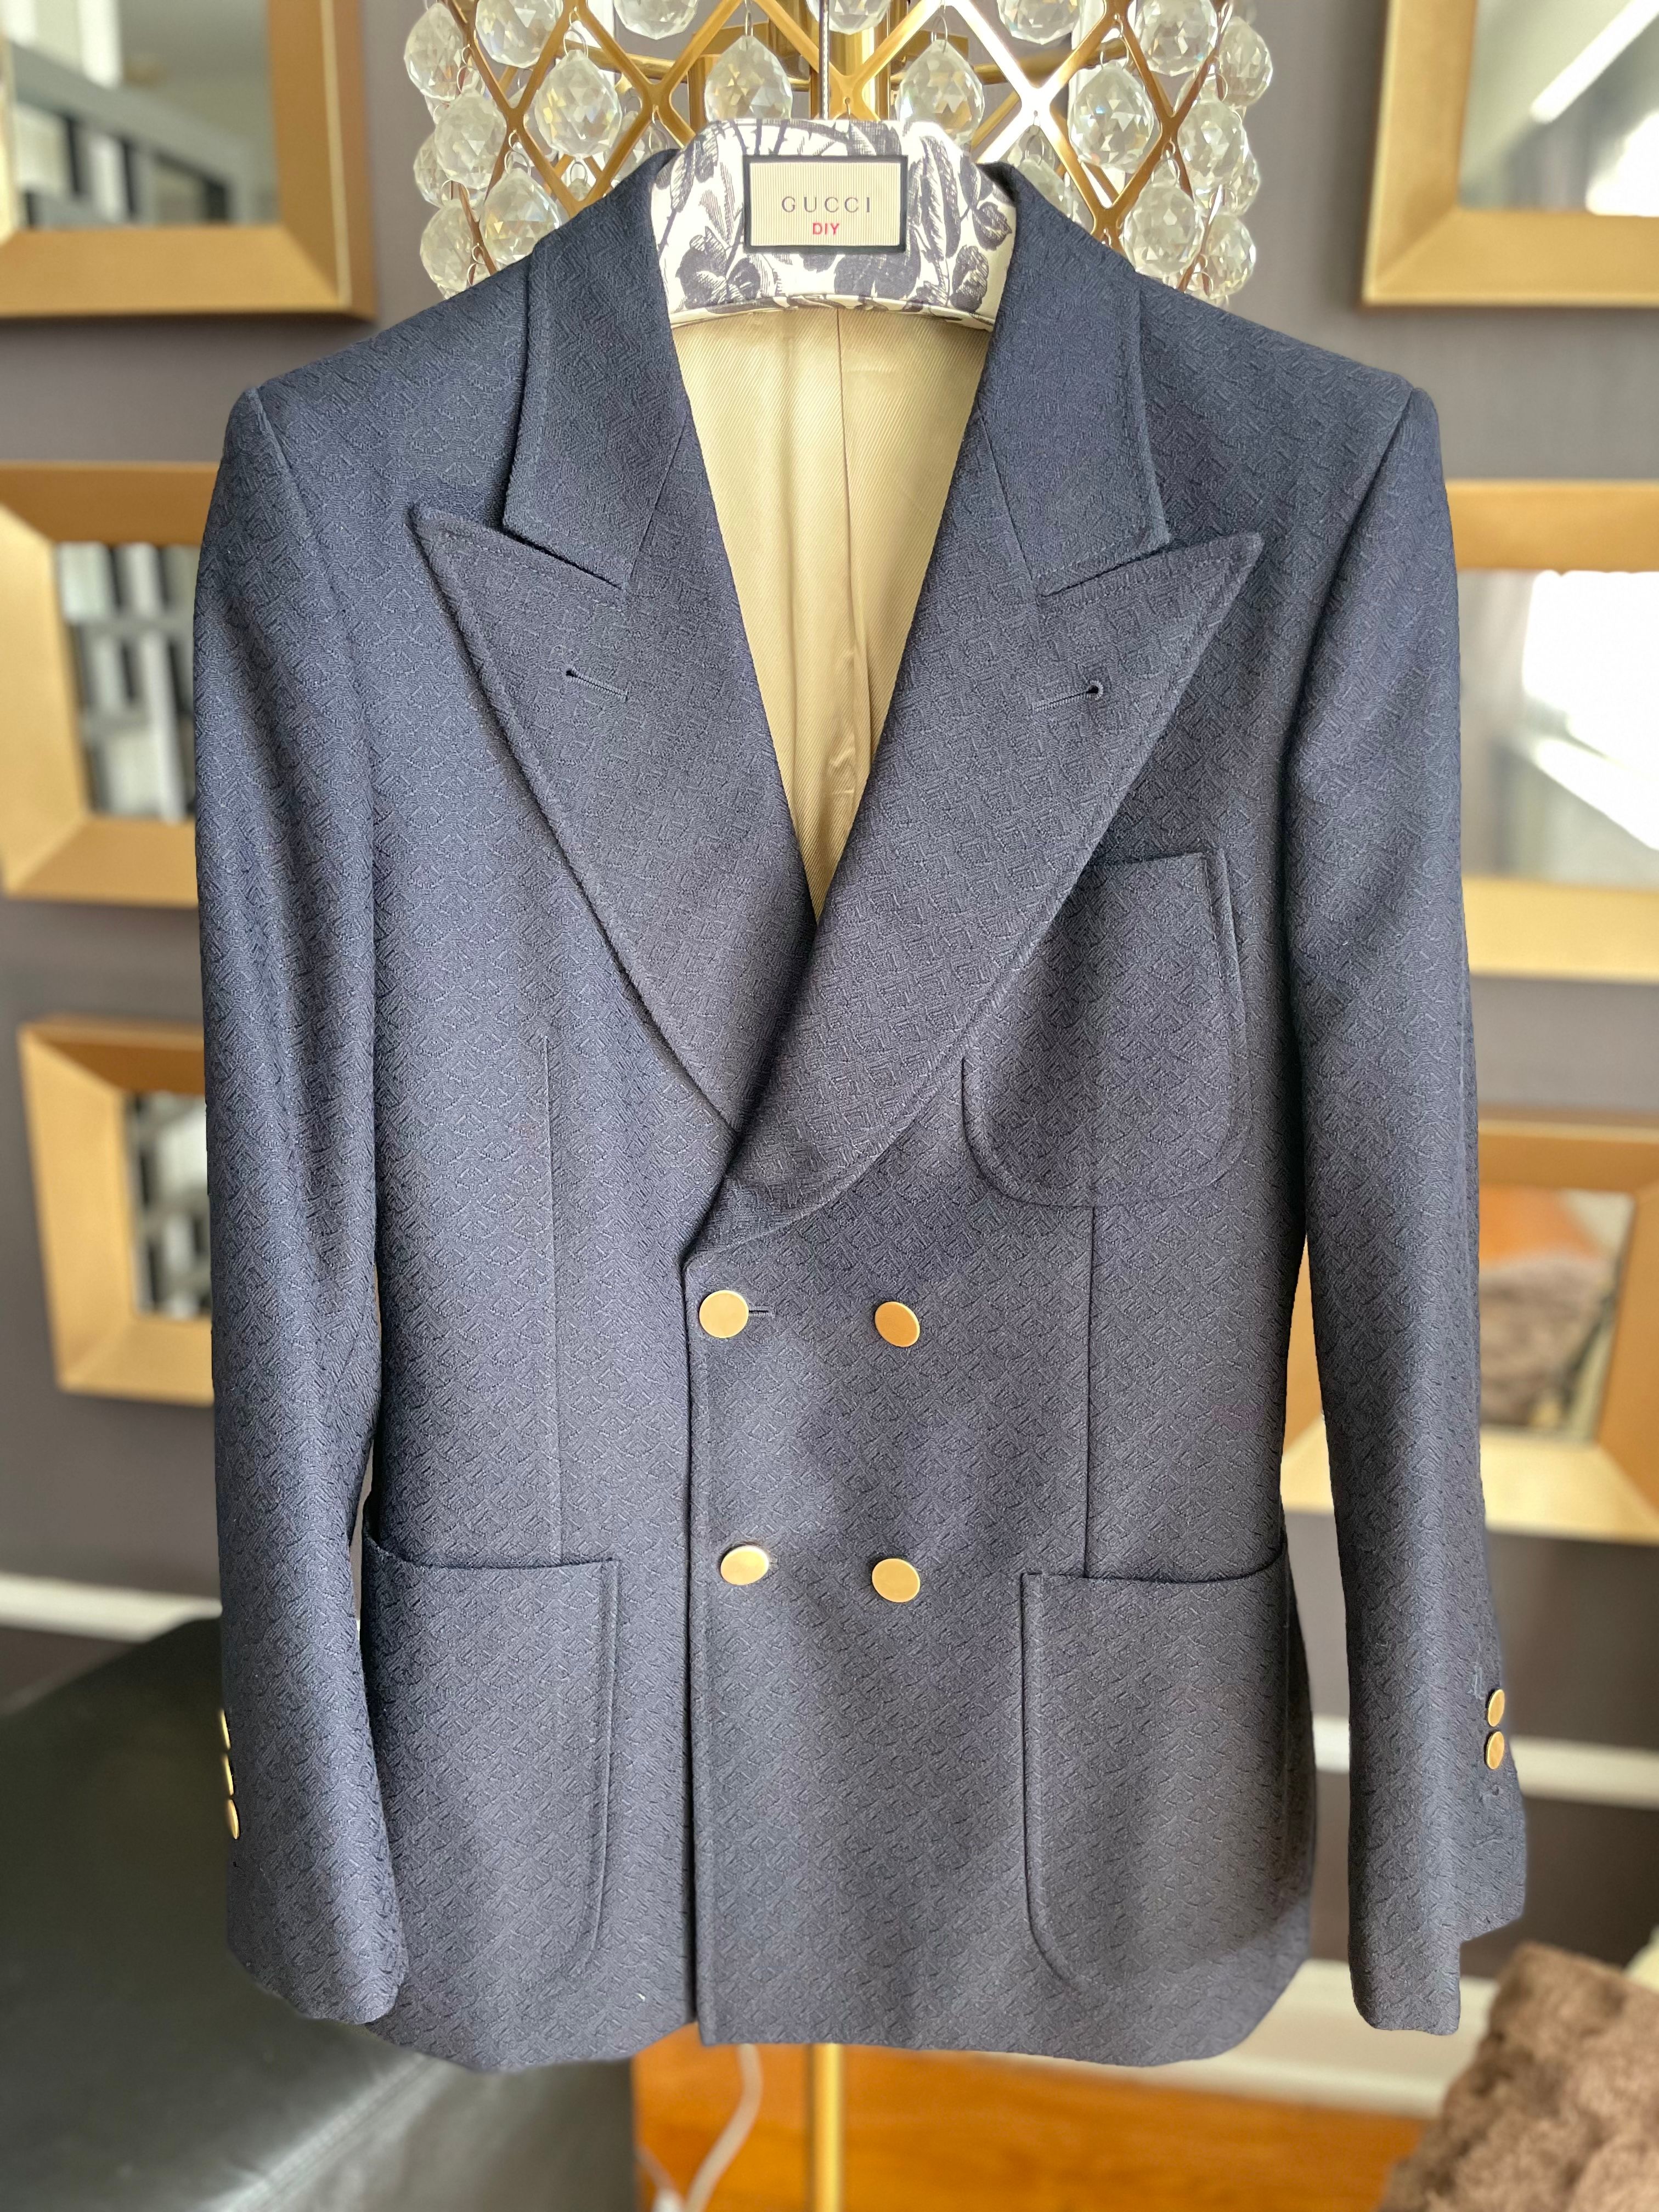 Gucci Gucci Navy Blue Texturized Double Breasted Blazer SS2020 Size 44R - 1 Preview